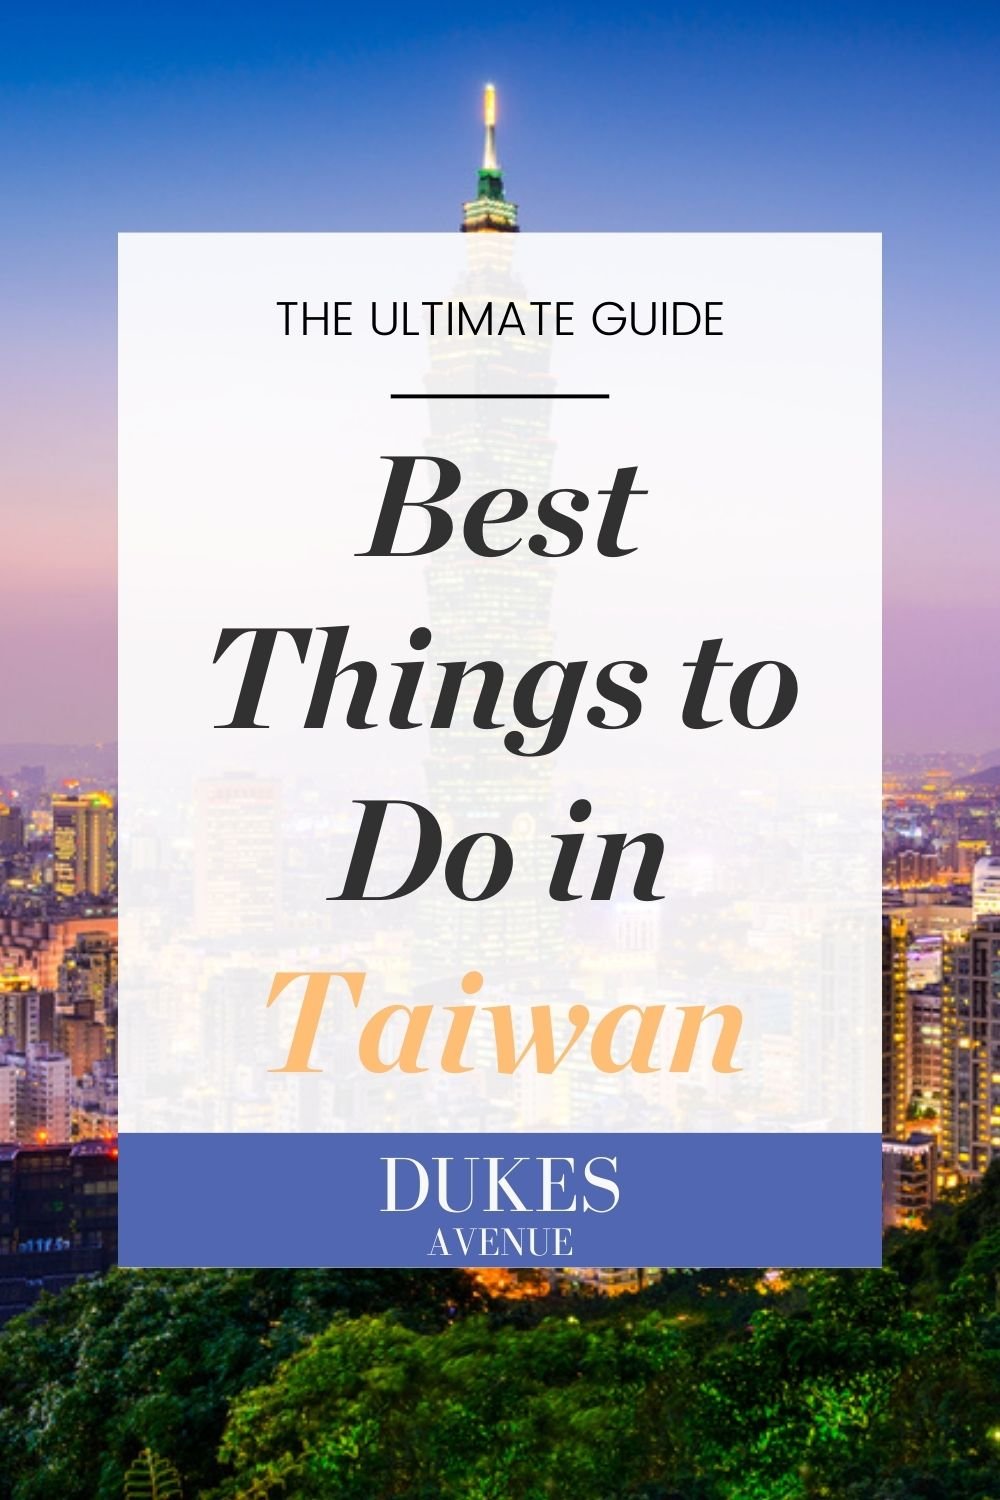 Image of Taipei with text overlay 'Best Things to Do in Taiwan'